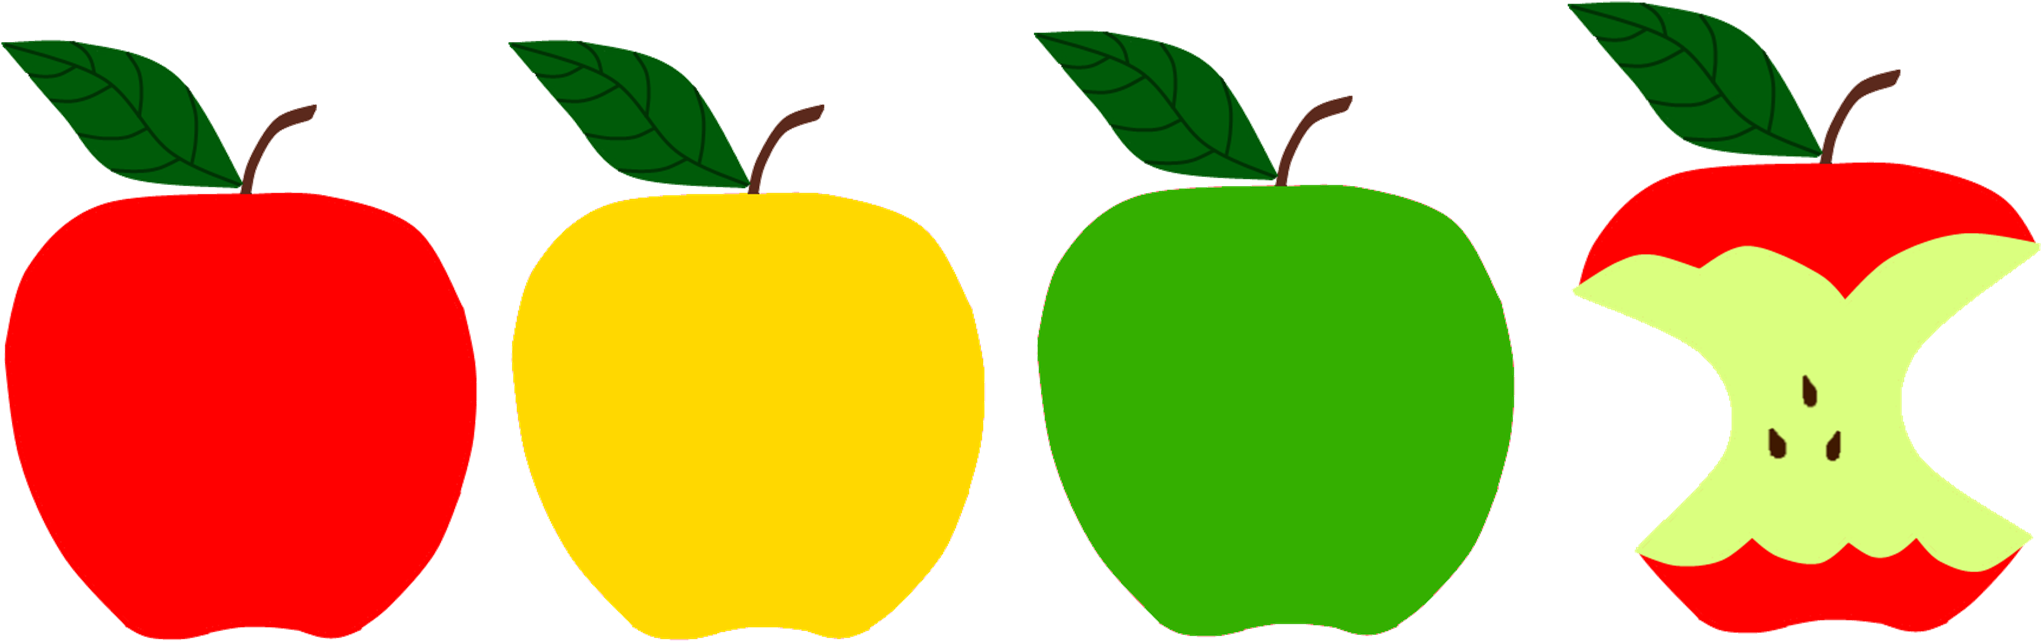 Colorful Apple Sequence PNG